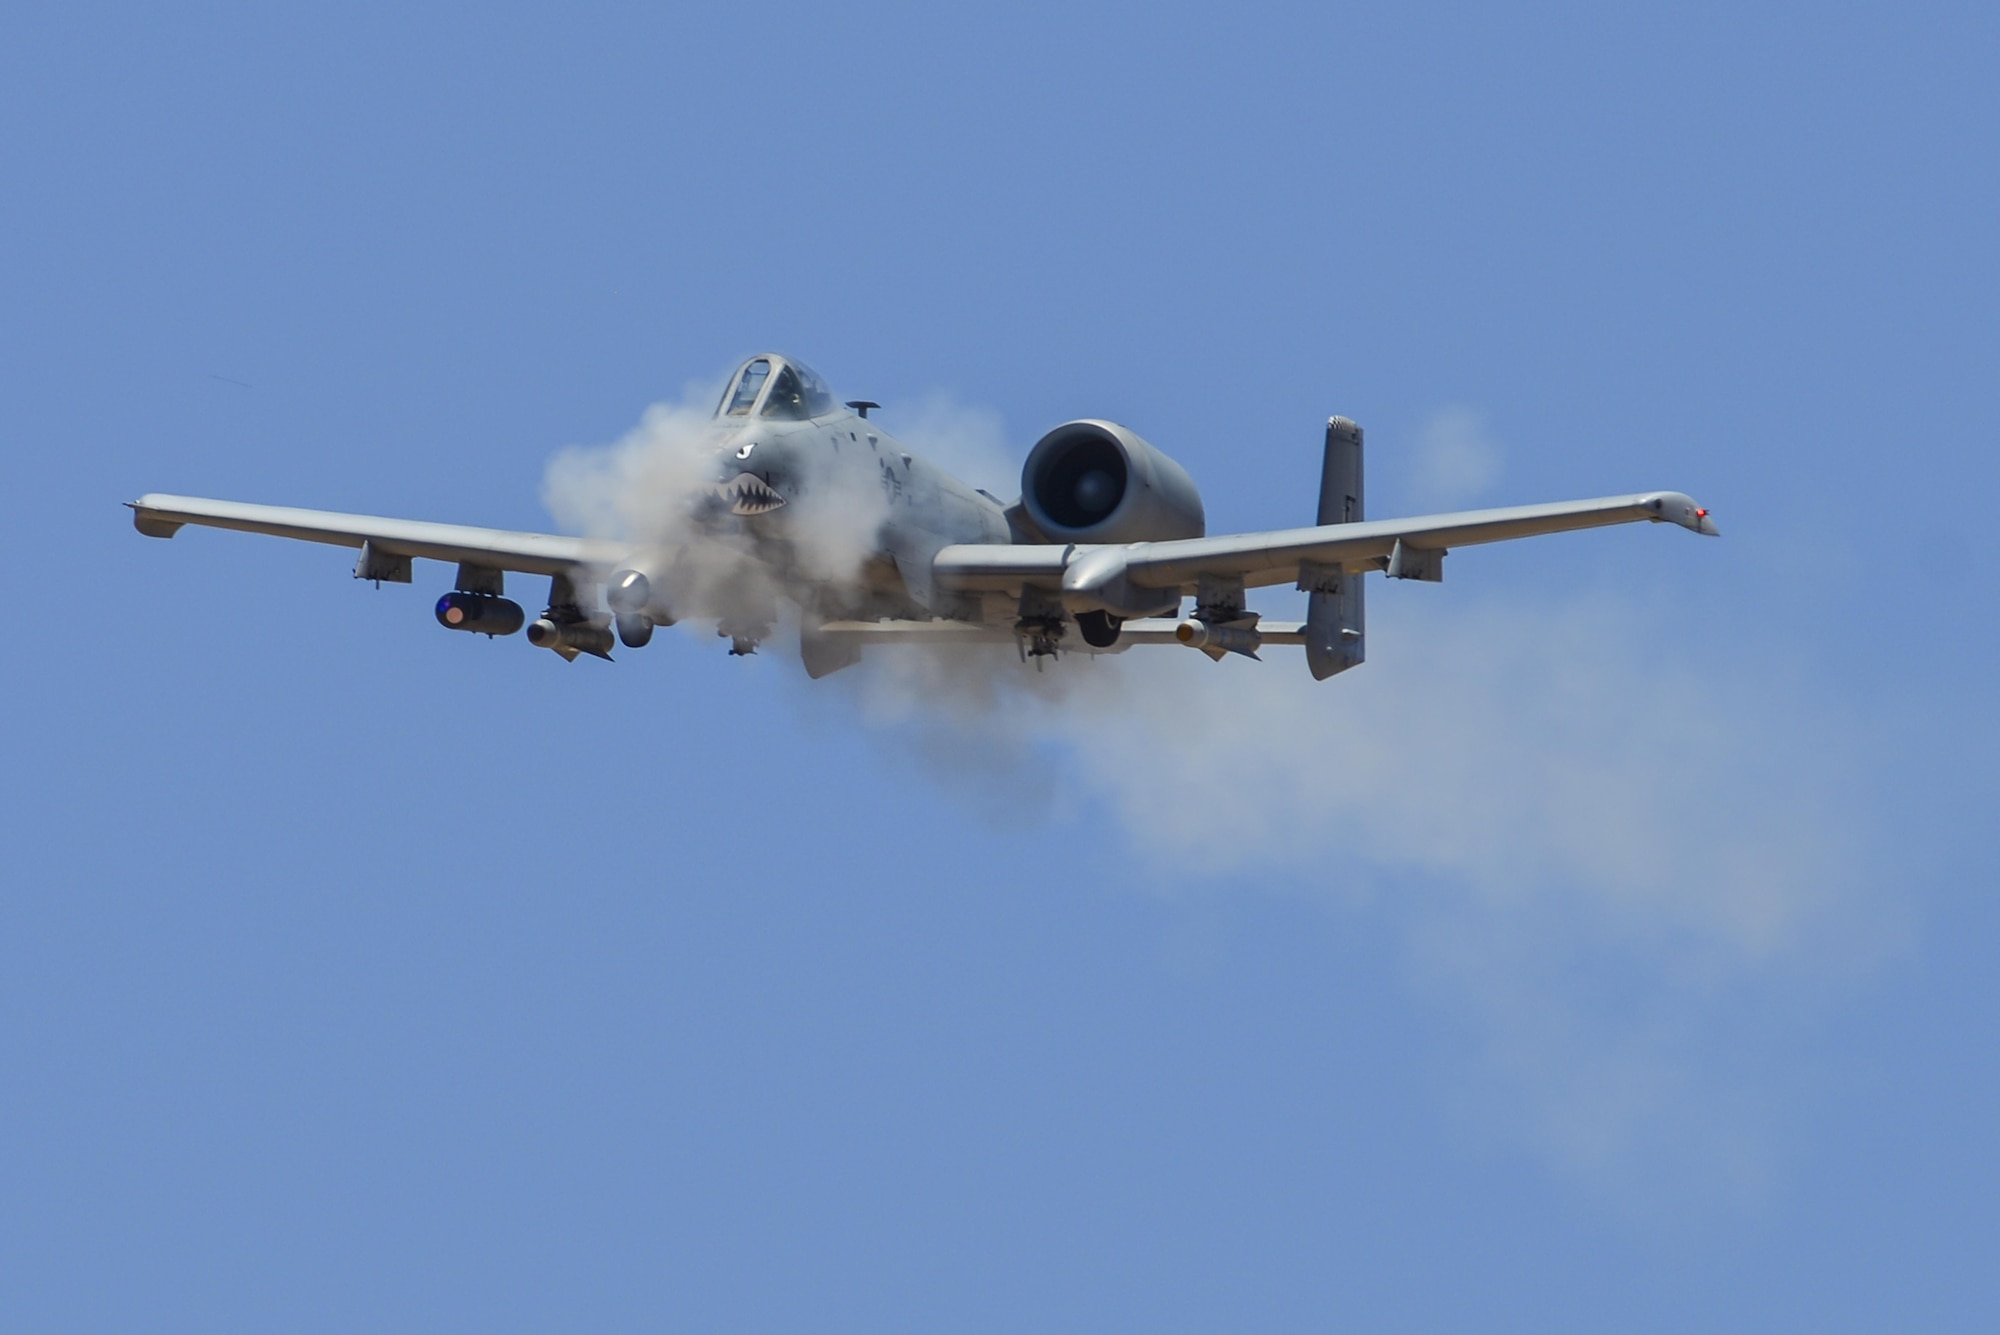 An A-10C Thunderbolt II assigned to the 23rd Fighter Group, Moody AFB, Ga., performs a low-angle strafe during the 2016 Hawgsmoke competition at Barry M. Goldwater Range, Ariz., June 2, 2016. Hawgsmoke is a biennial competition focused on tactics the A-10C can employ during combat operations. (U.S. Air Force photo by Senior Airman Chris Drzazgowski/Released)